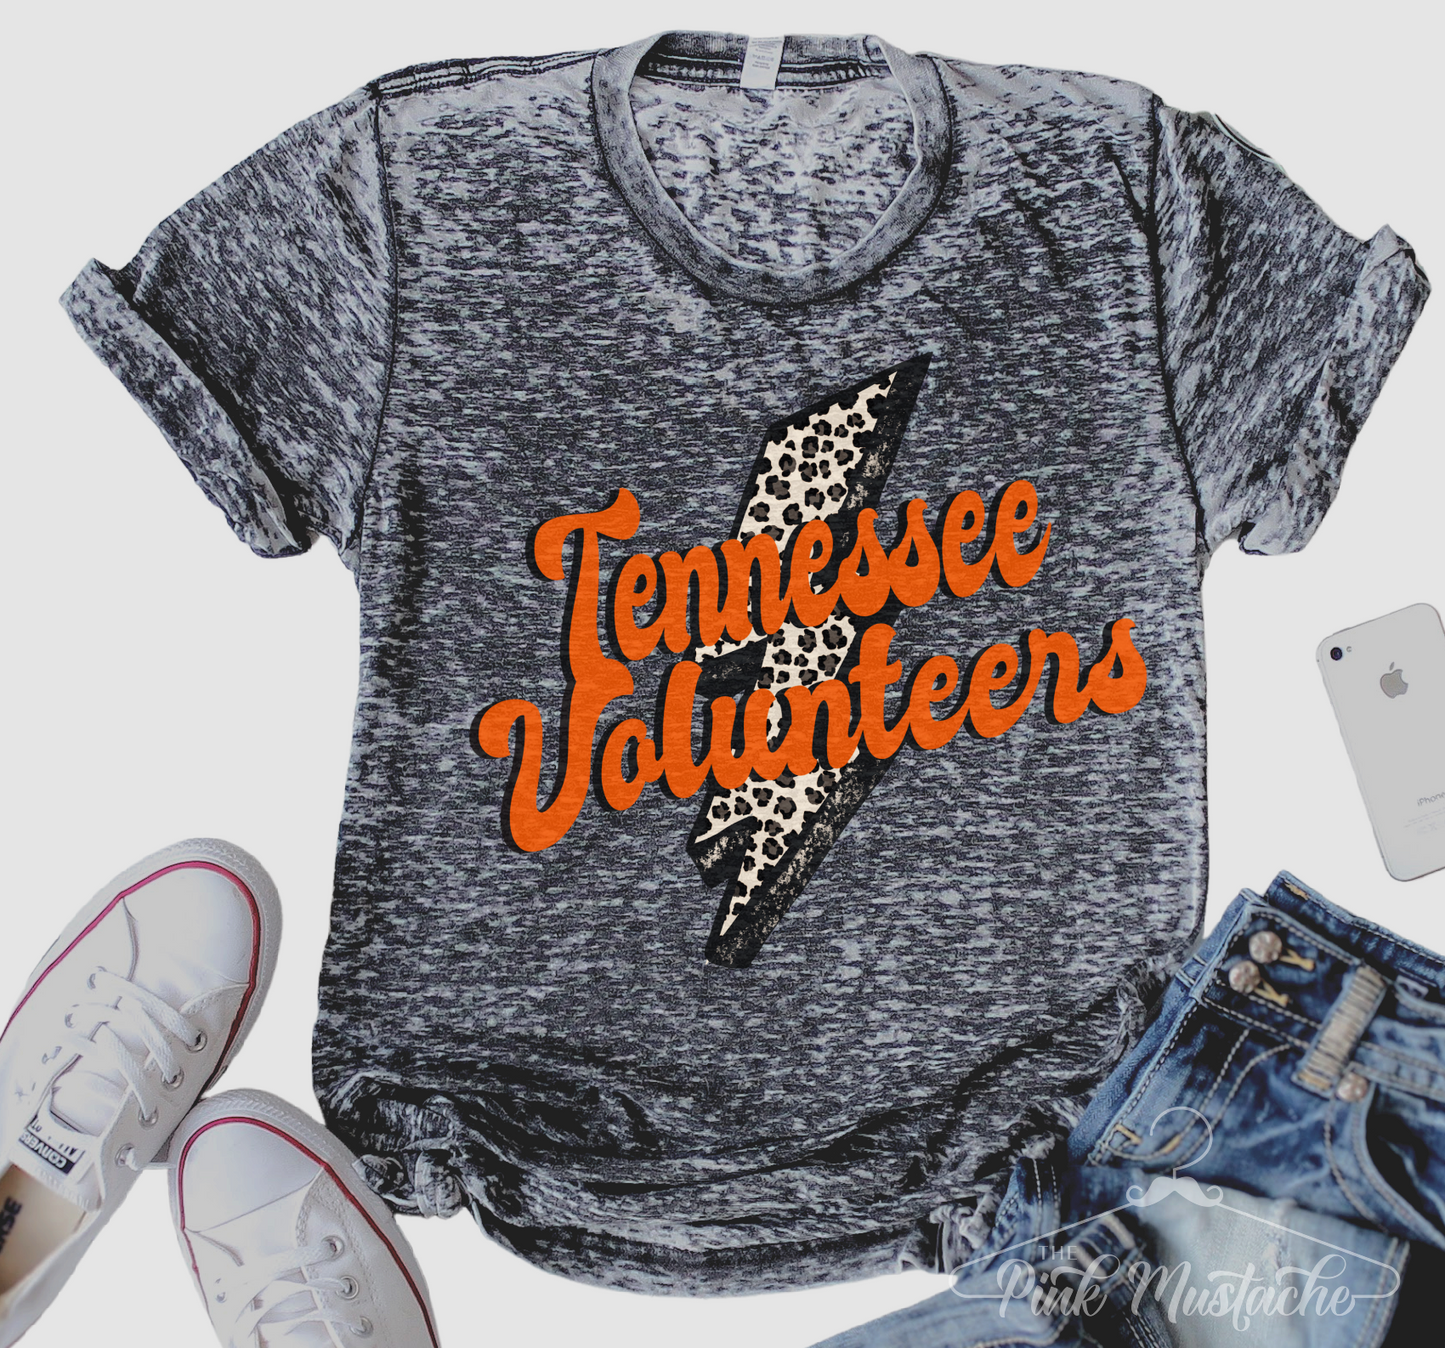 Acid Washed Tennessee Lightning Bolt Shirt/ Softstyle Tee/  Adult Sizing Available